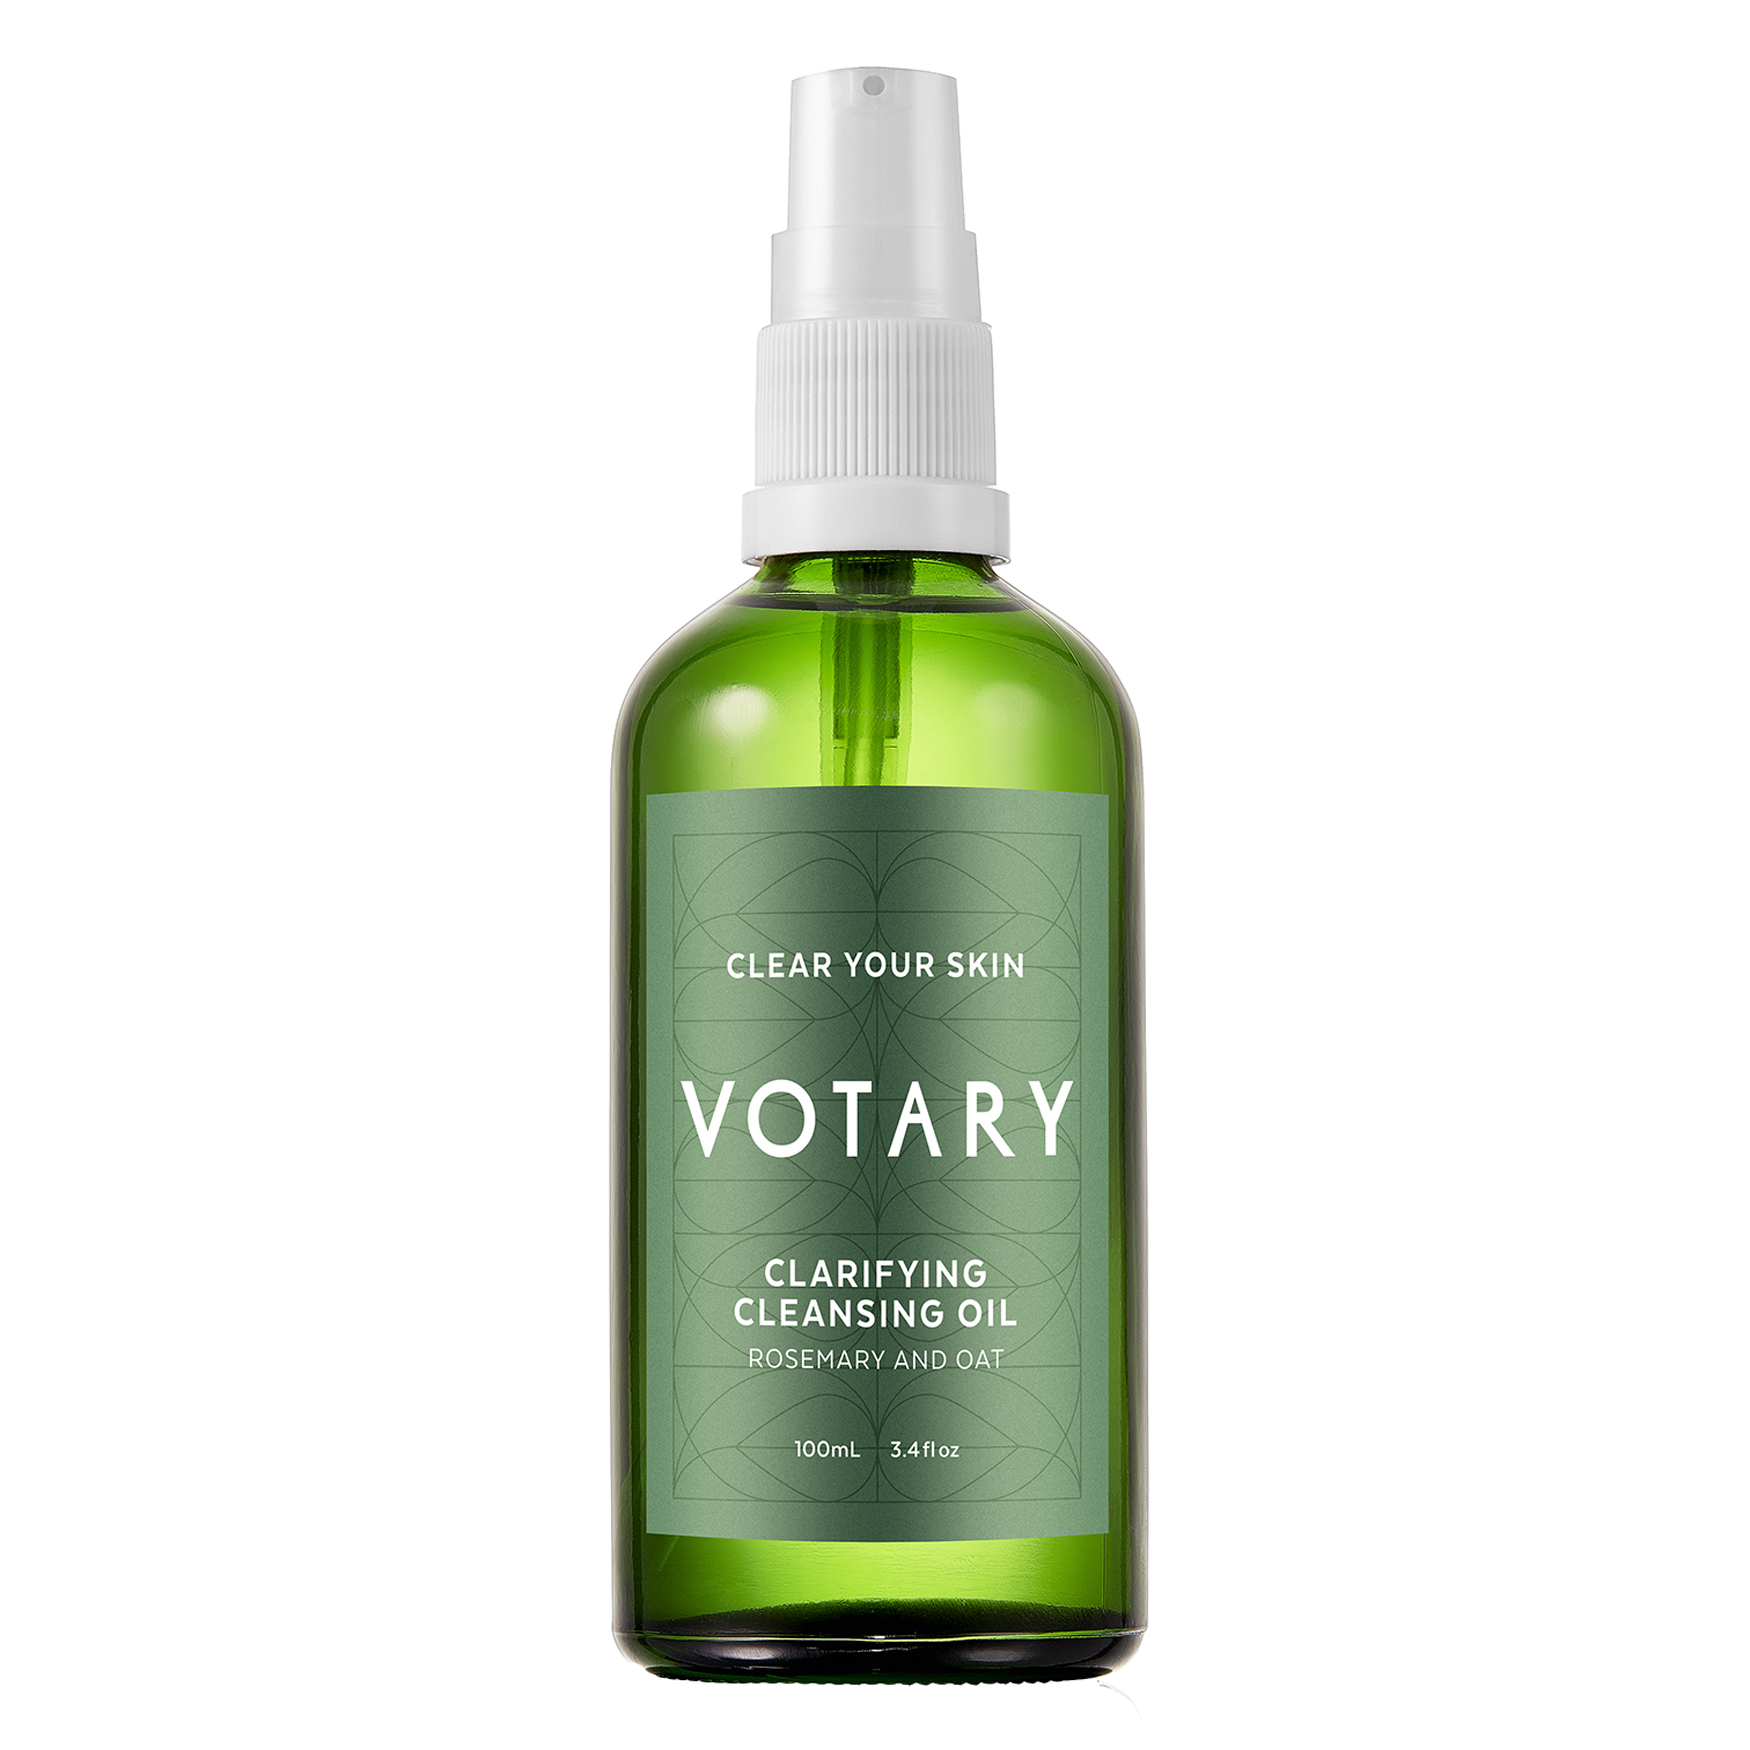 Clarifying cleansing. Rosmary Oil. Baby Clarity Cleanse. Rosmary купить.